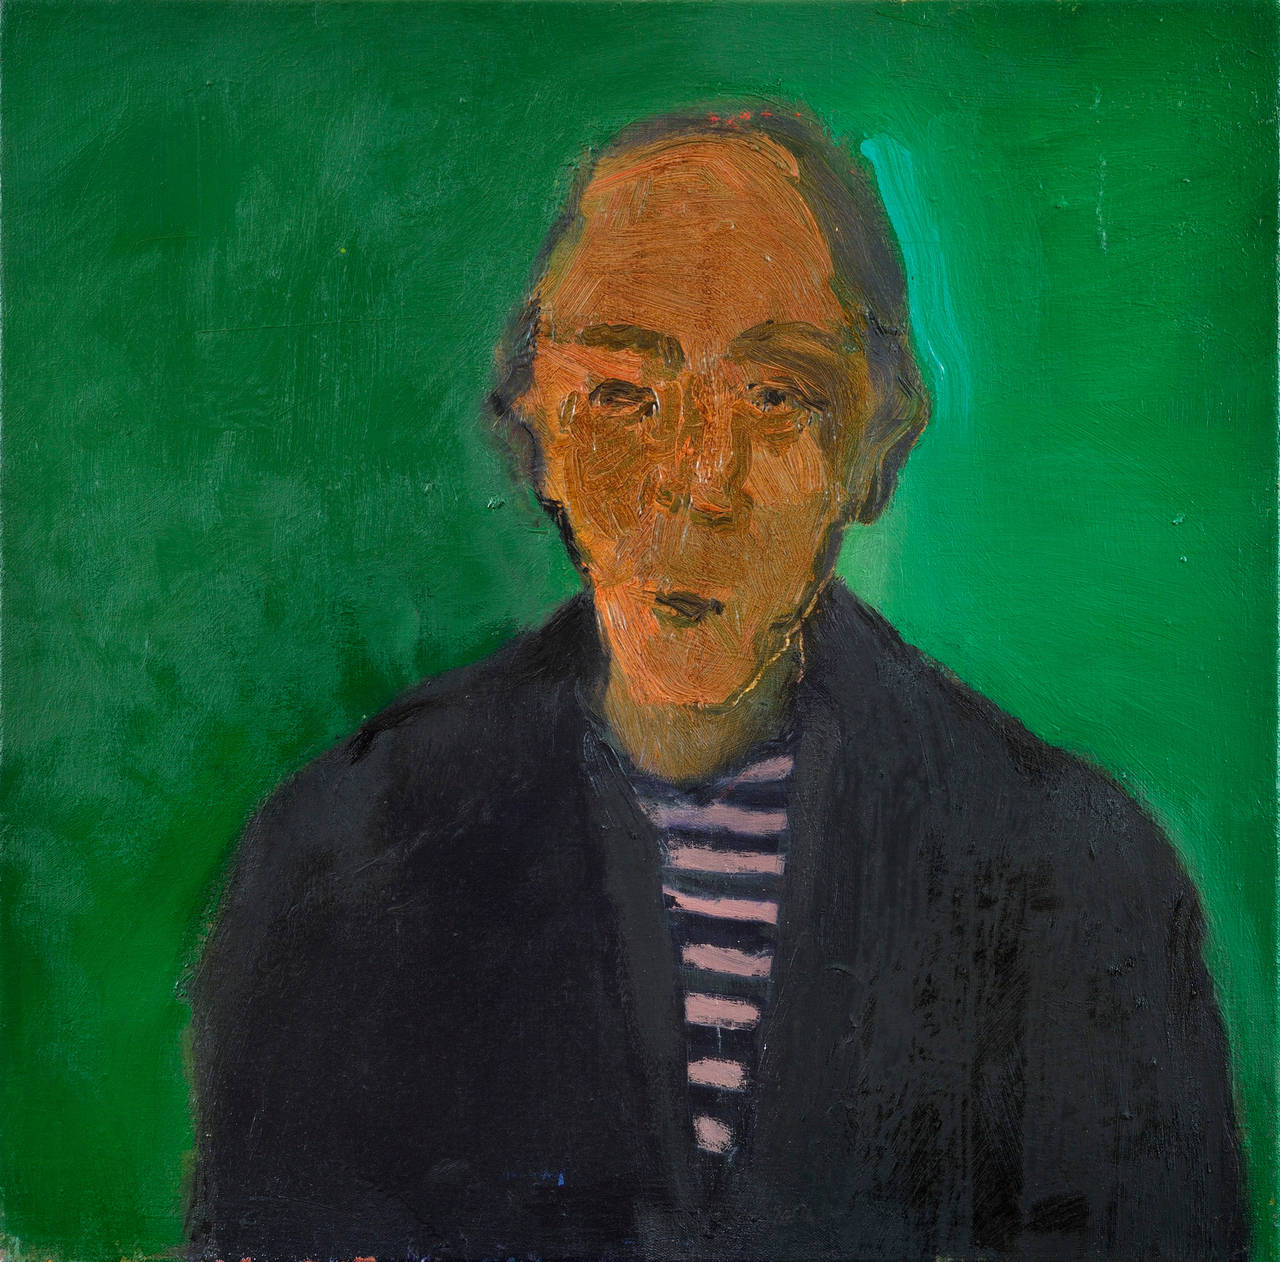 Man with Striped Shirt - green, male portrait figurative still life oil painting